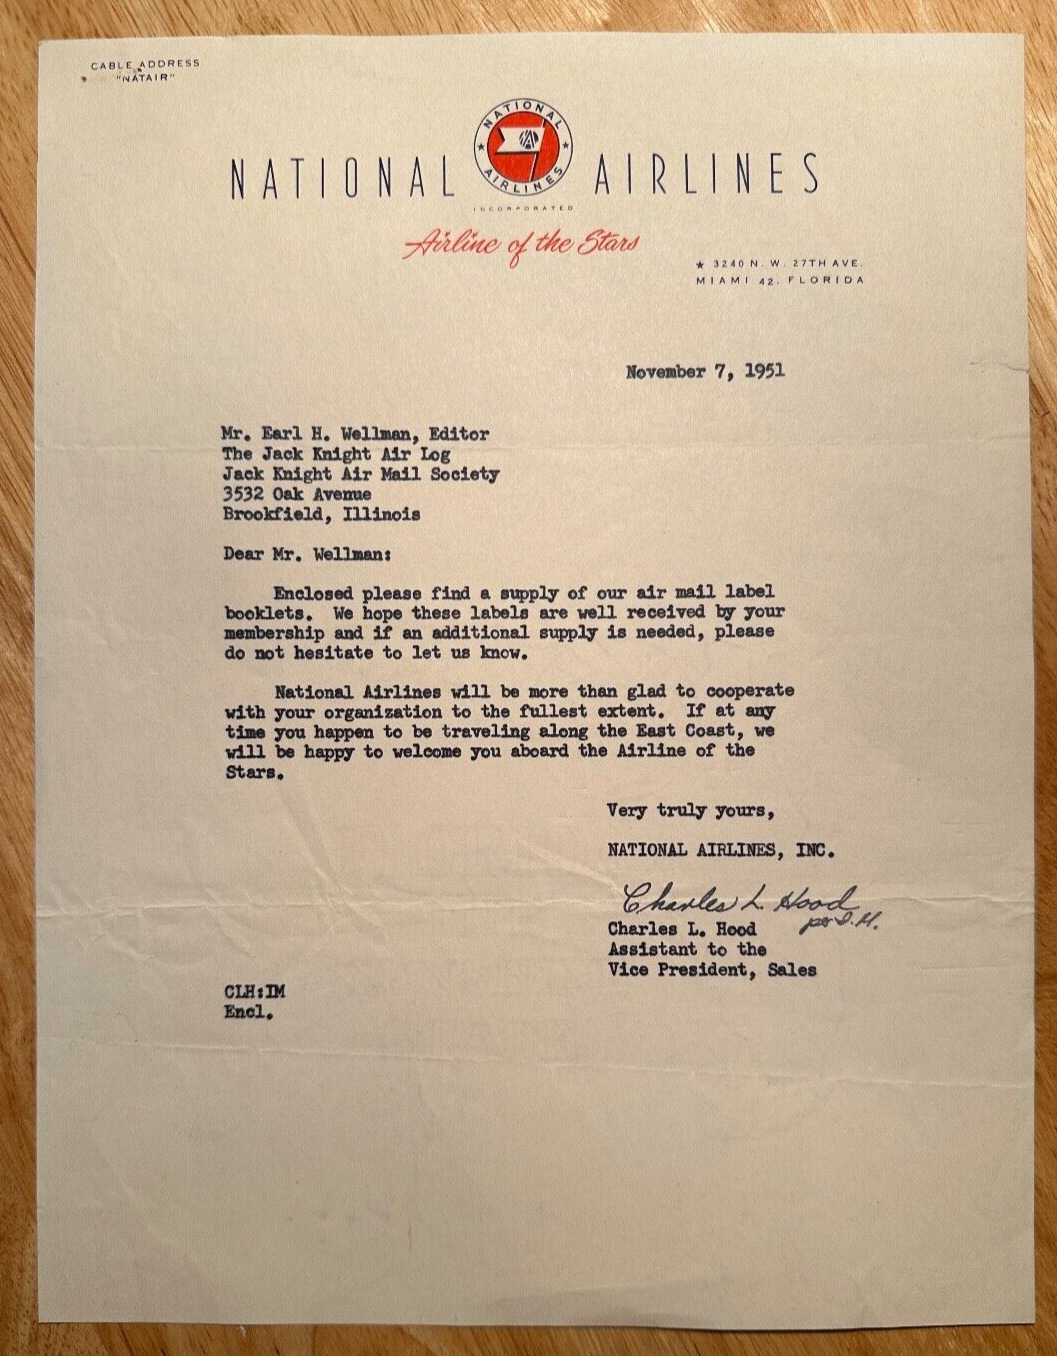 National Airlines - 1951 Miami, Florida vintage business letter